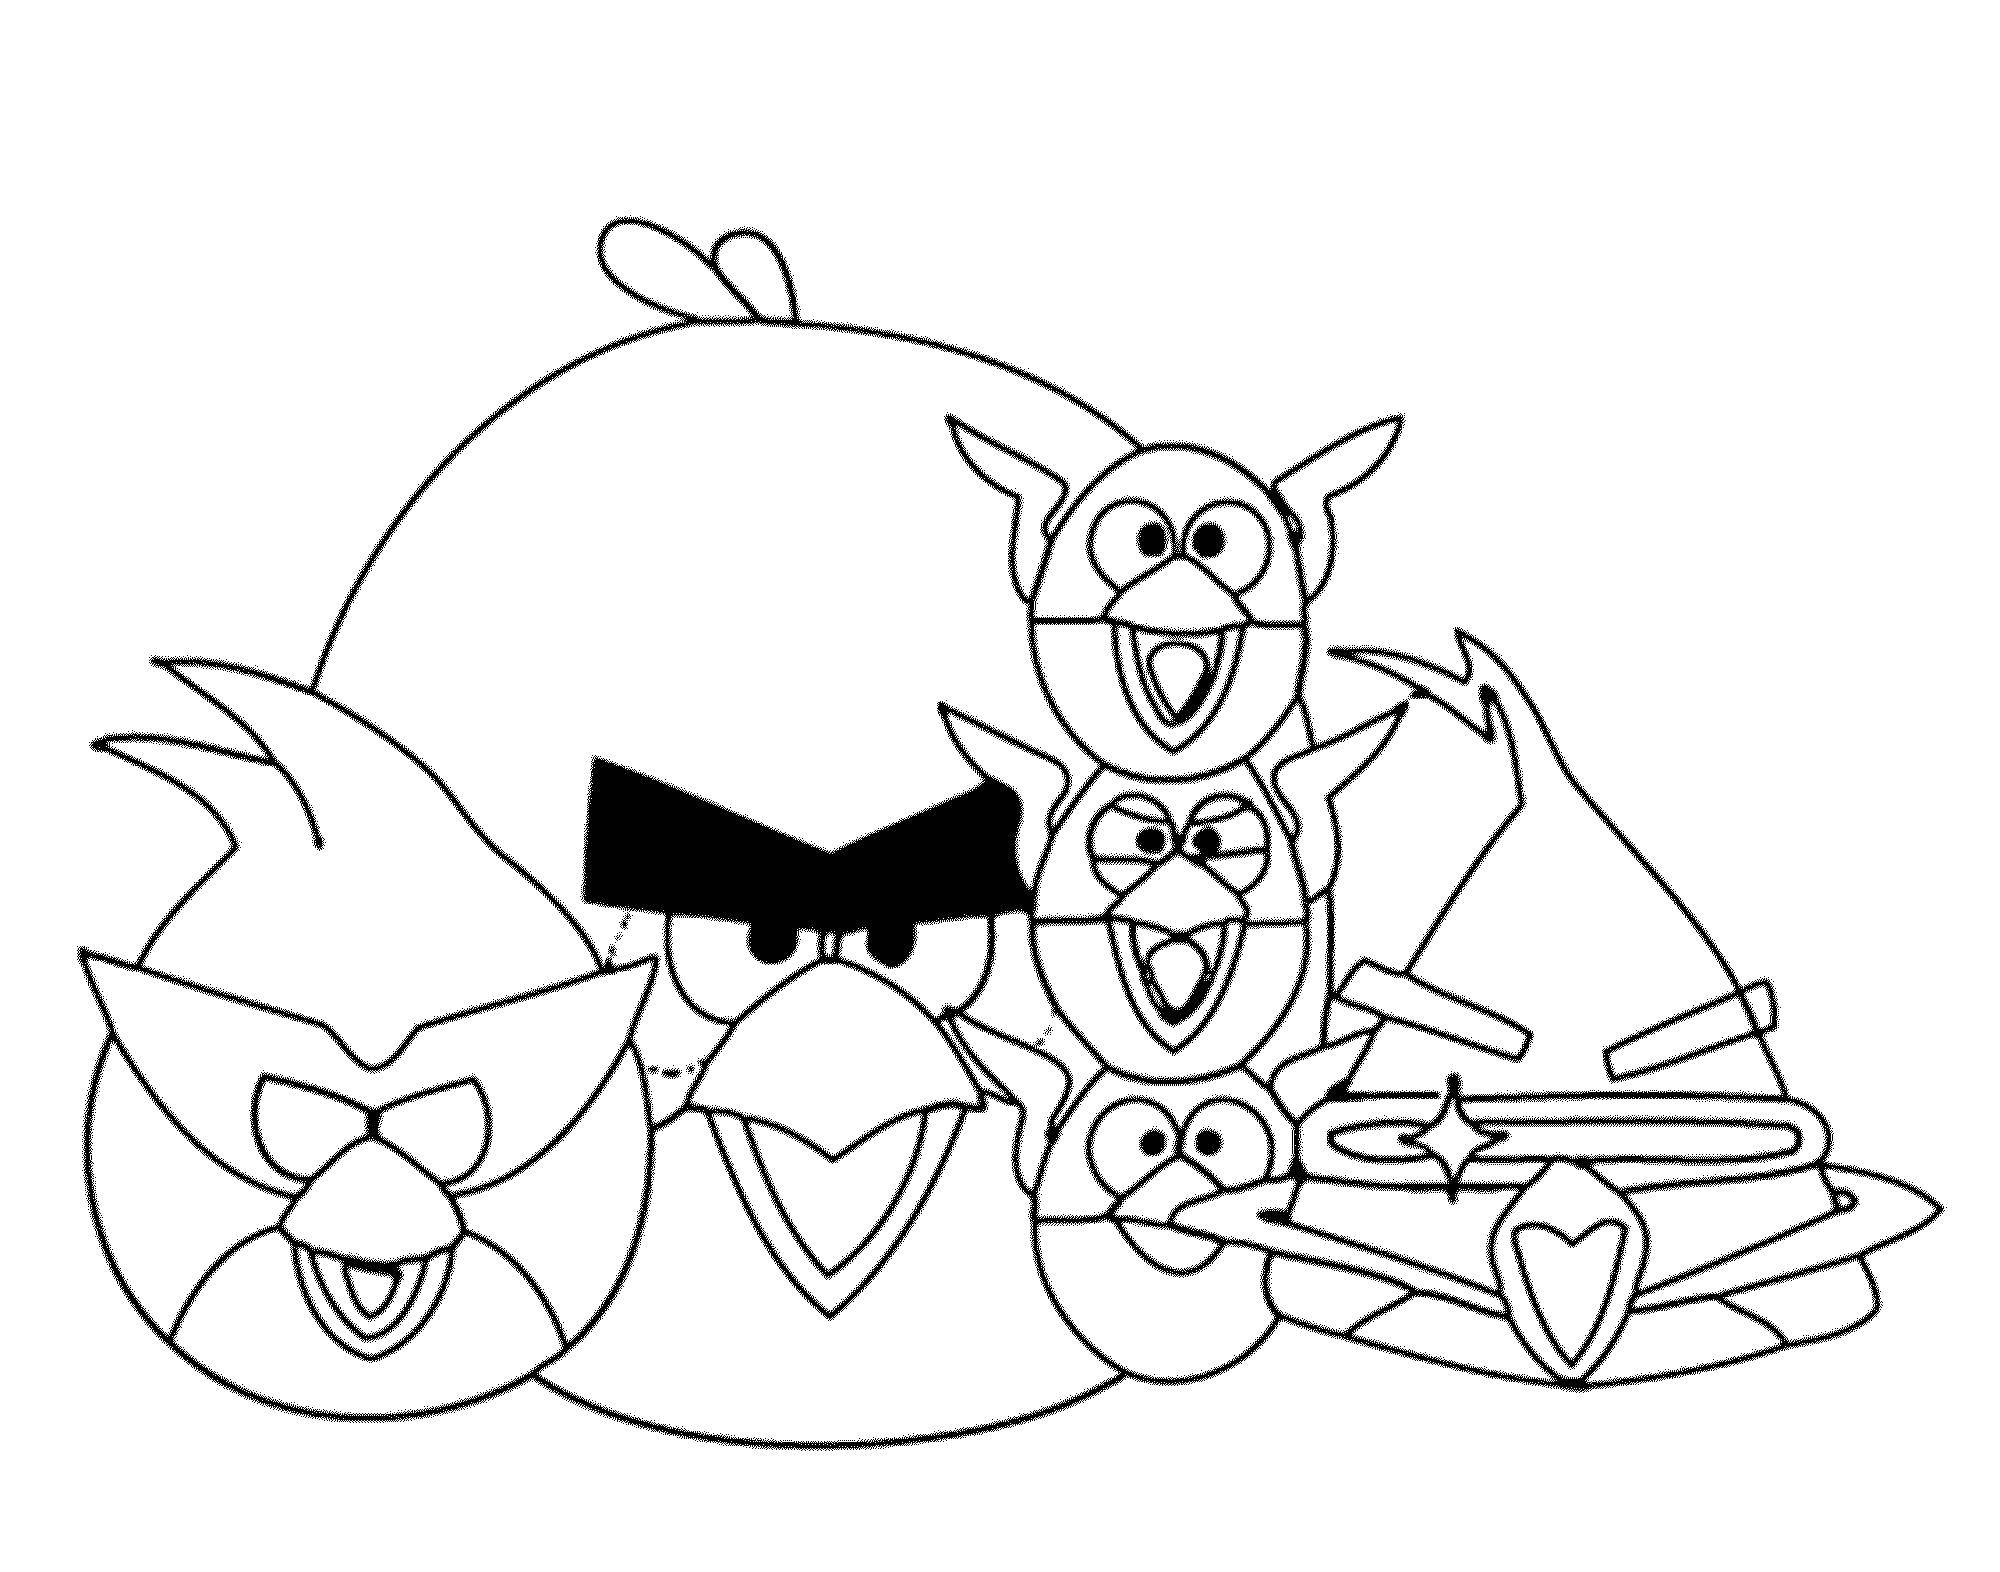 Coloring Birds space. Category angry birds. Tags:  Games, Angry Birds .